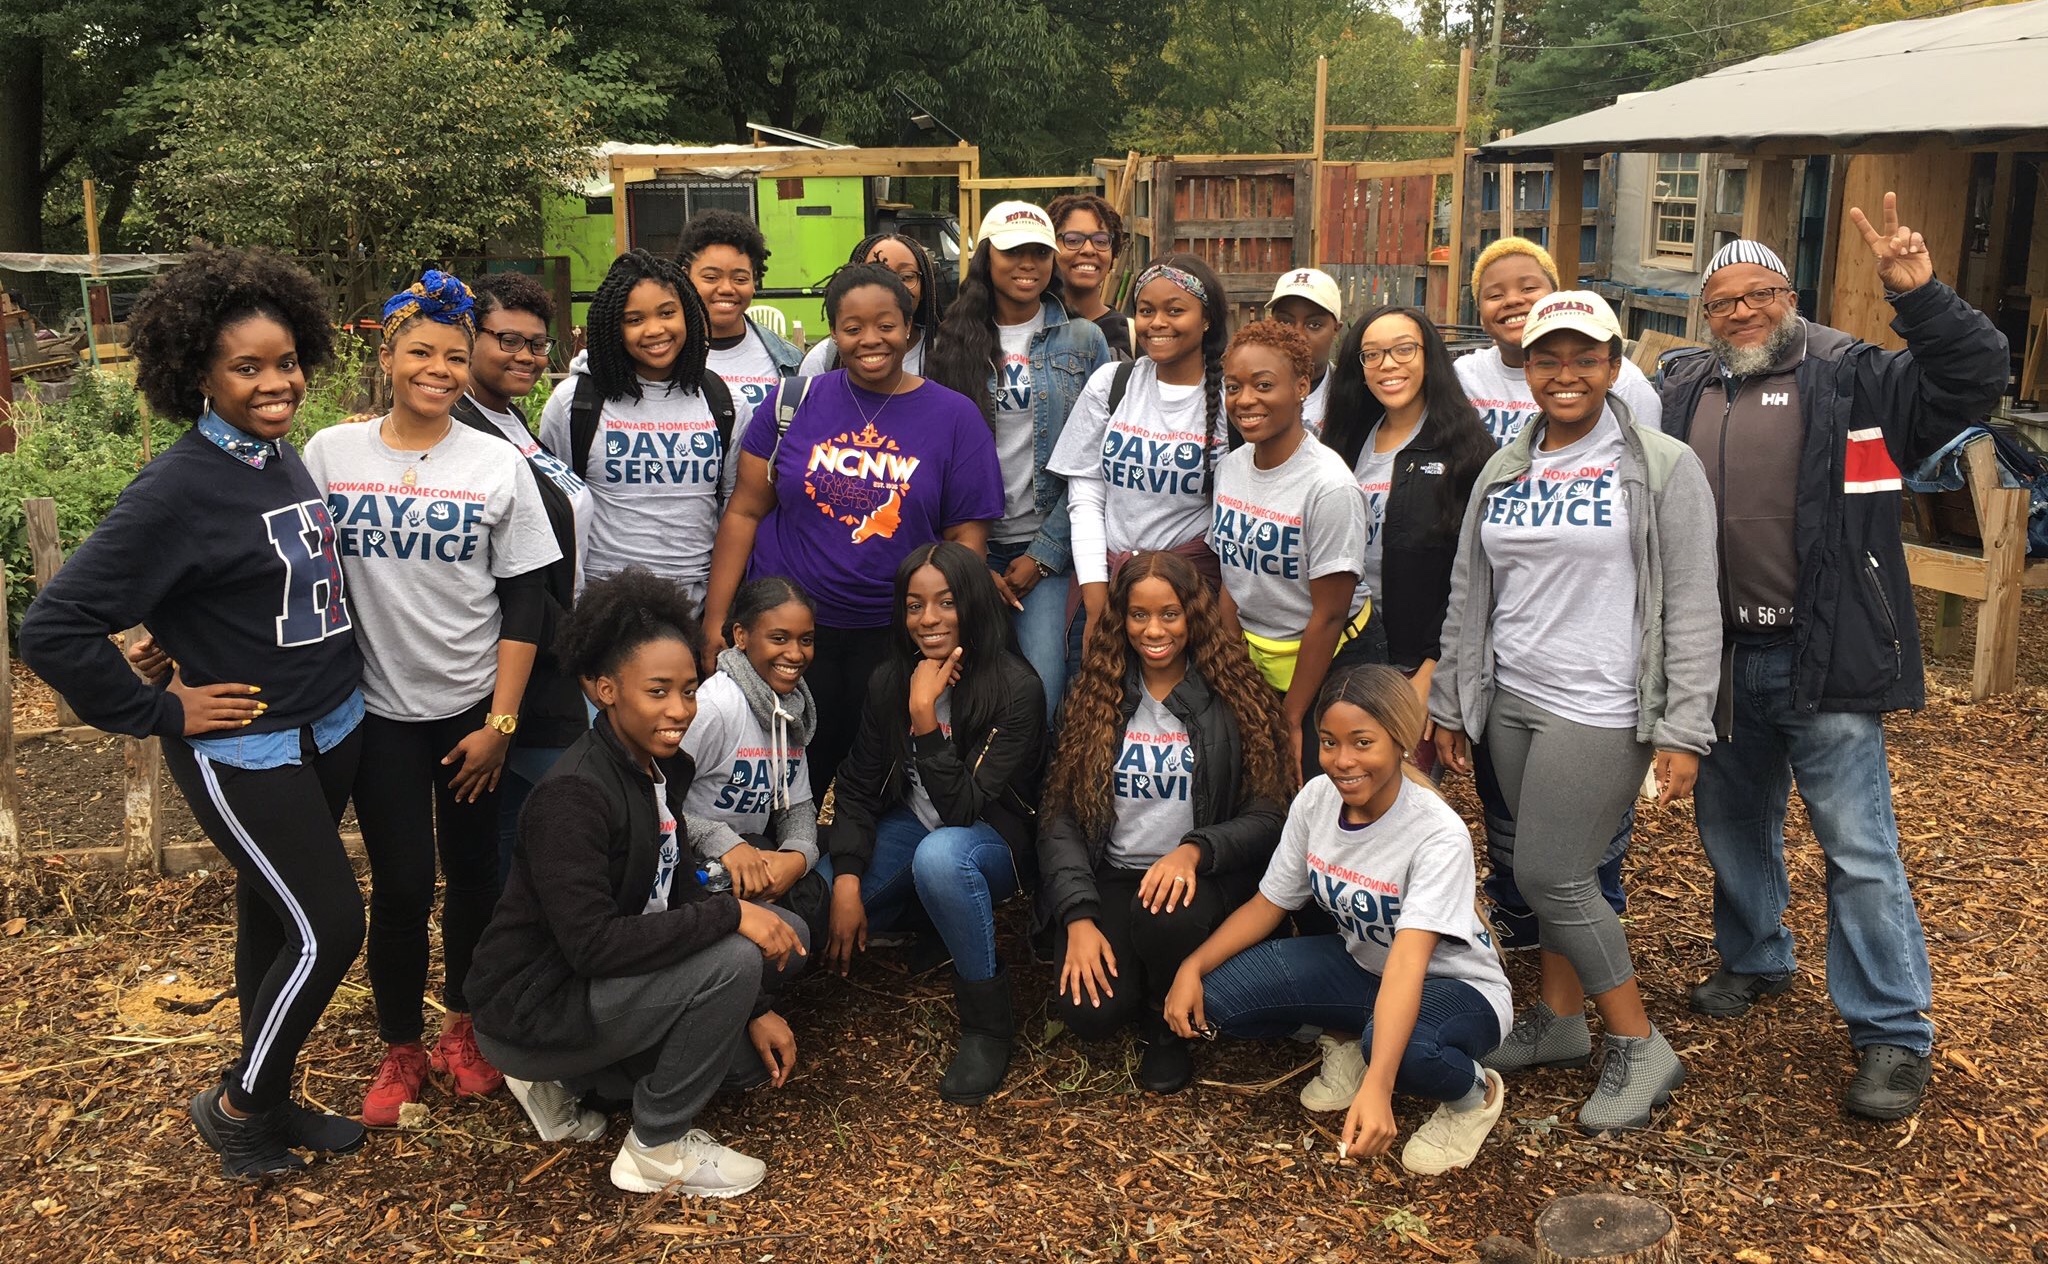 Howard University Homecoming Day of Service: Students Give Back To The Community